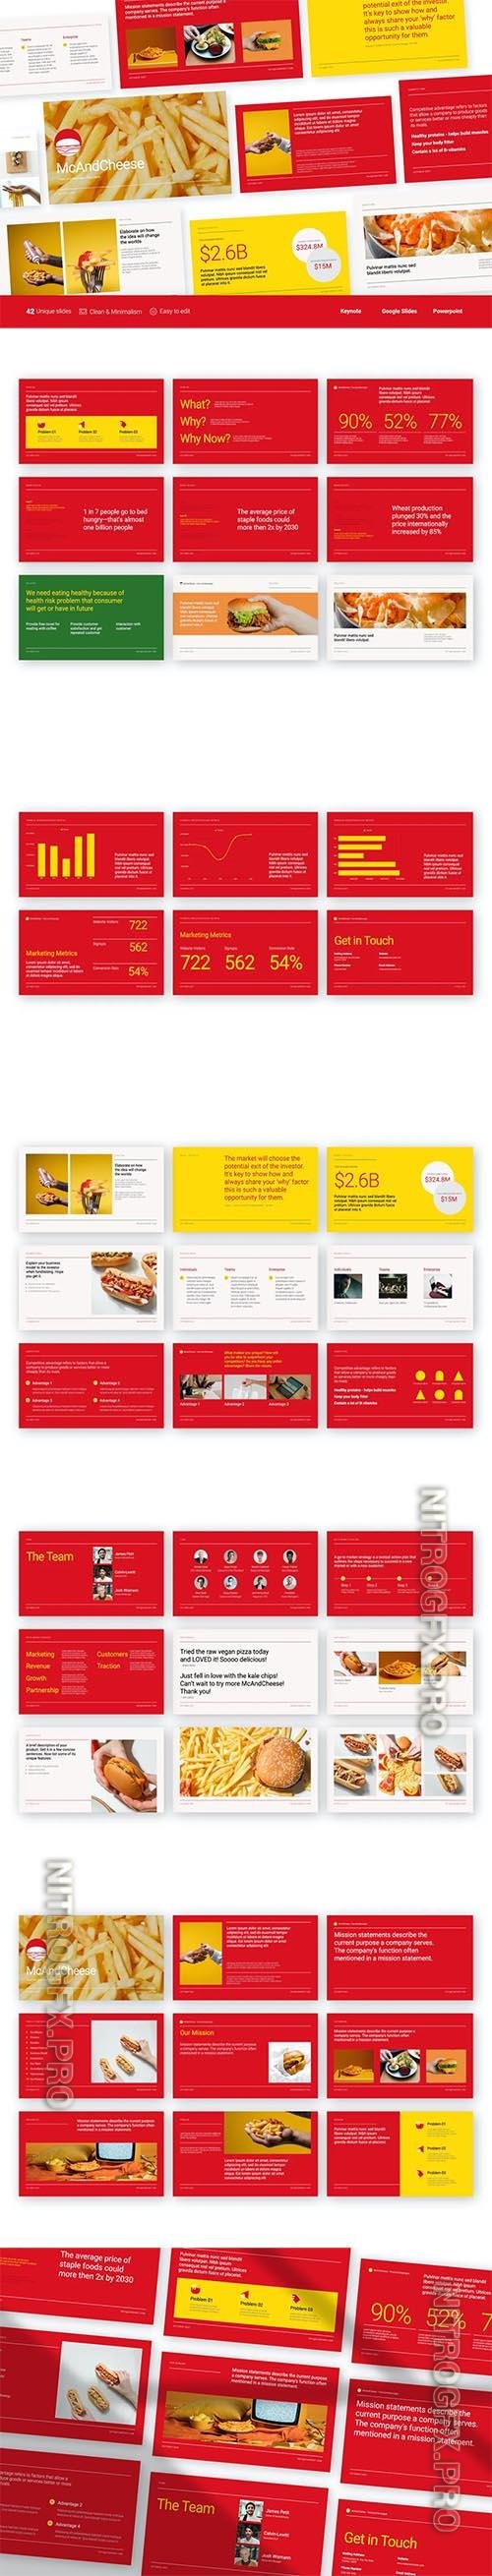 McAndCheese - Food and Beverages Pitch Deck